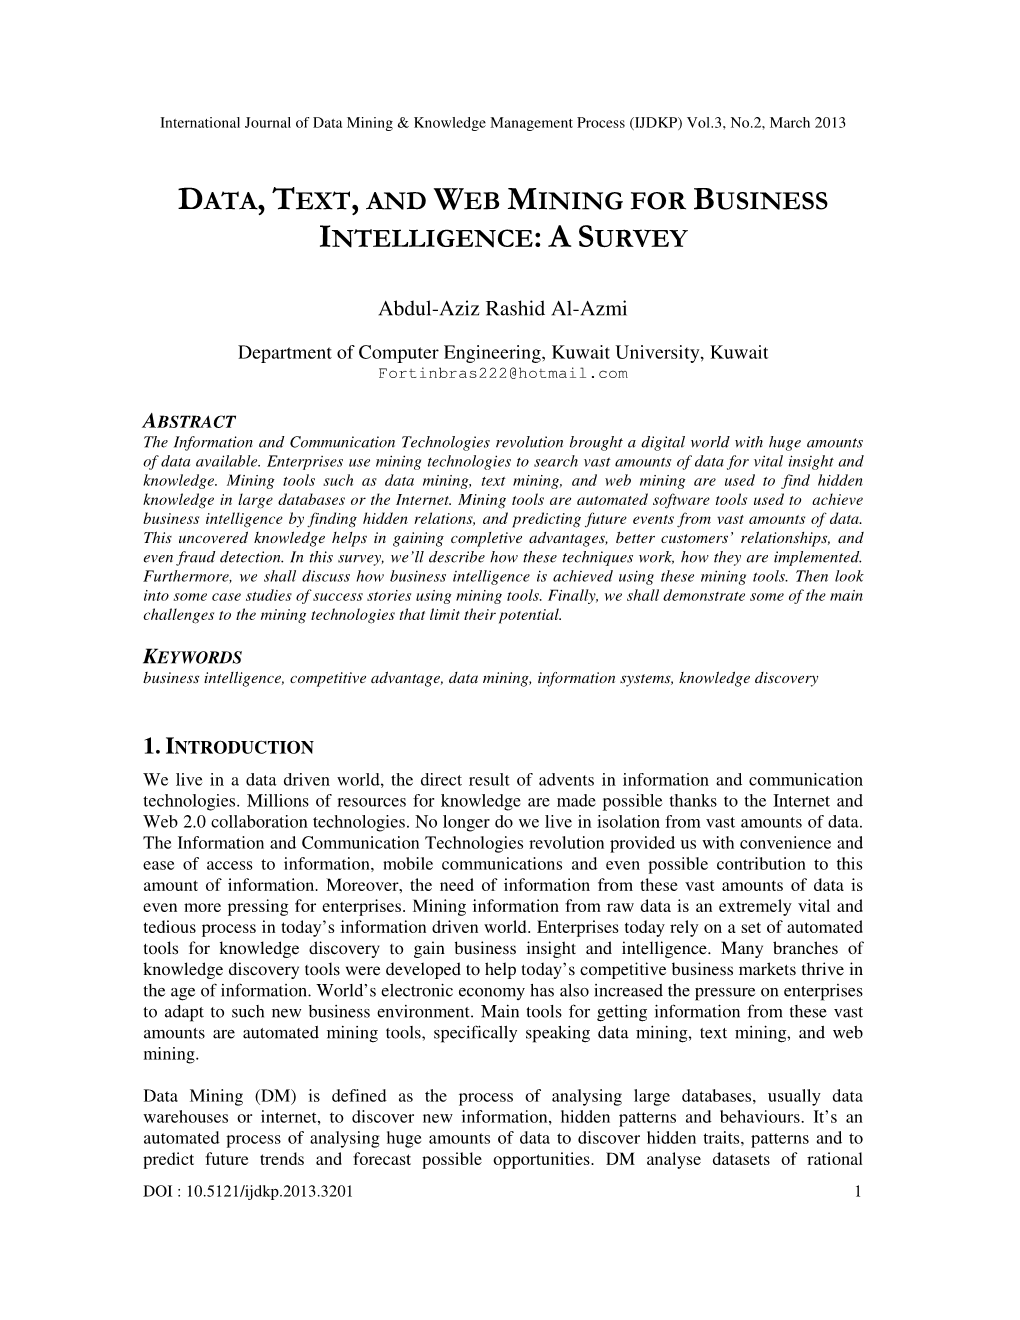 Data, Text, and Web Mining for Business Intelligence